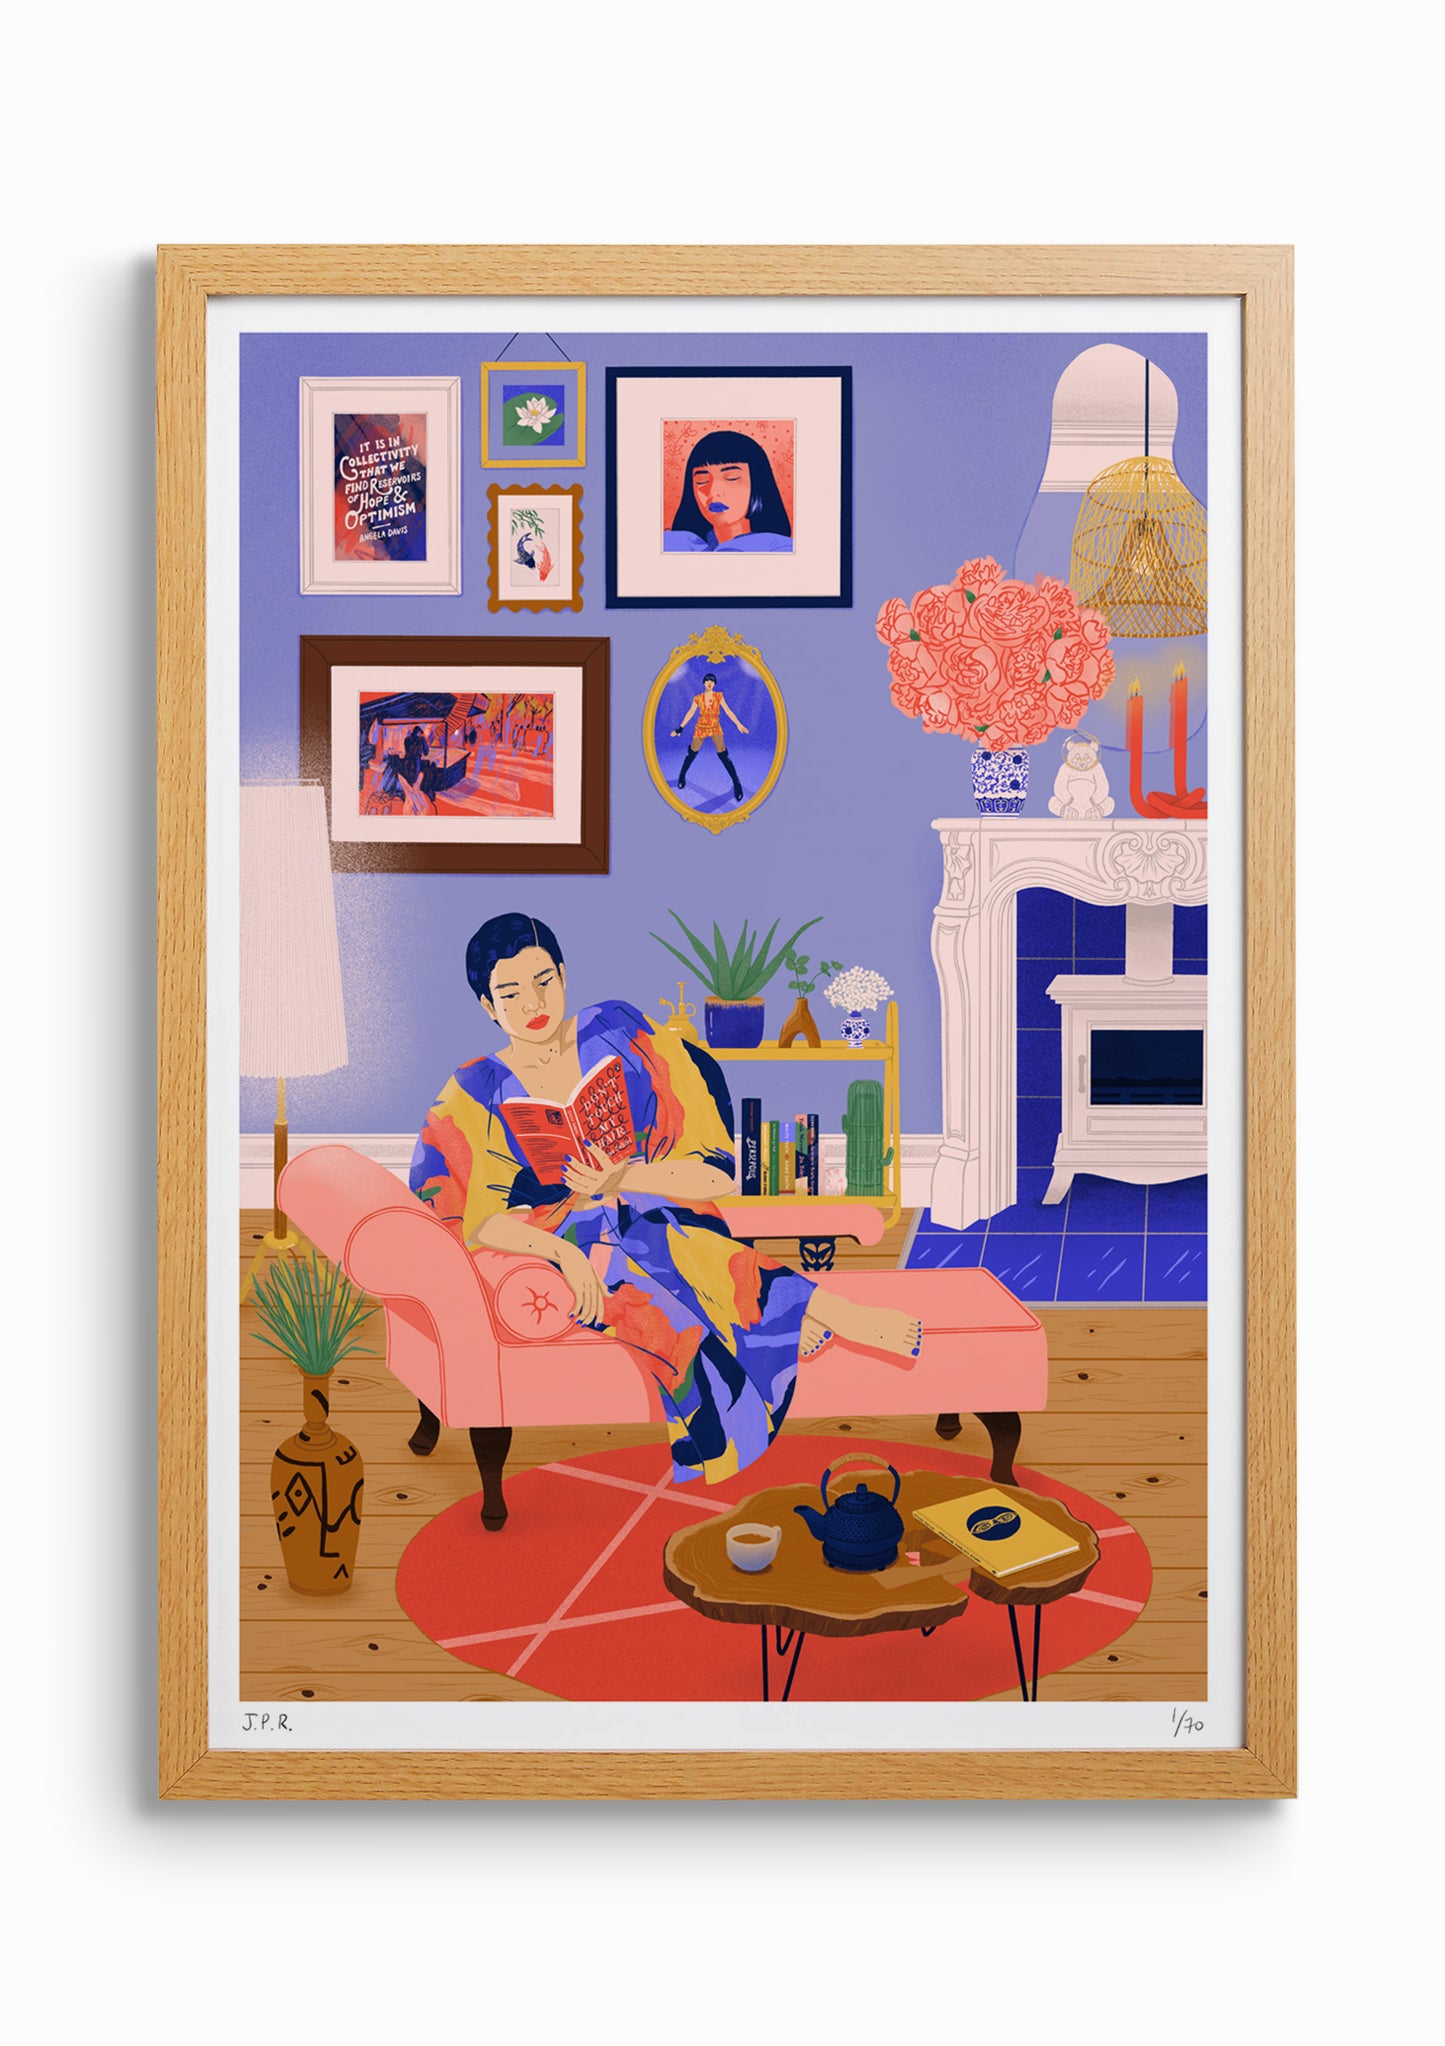 Framed illustration of an East Asian woman reading the book Don't Touch My Hair by Emma Dabiri. She is sat on a chaise long in her living room, surrounded by lovely objects, books and picture frames on the wall. She is wearing a multi-coloured dress.